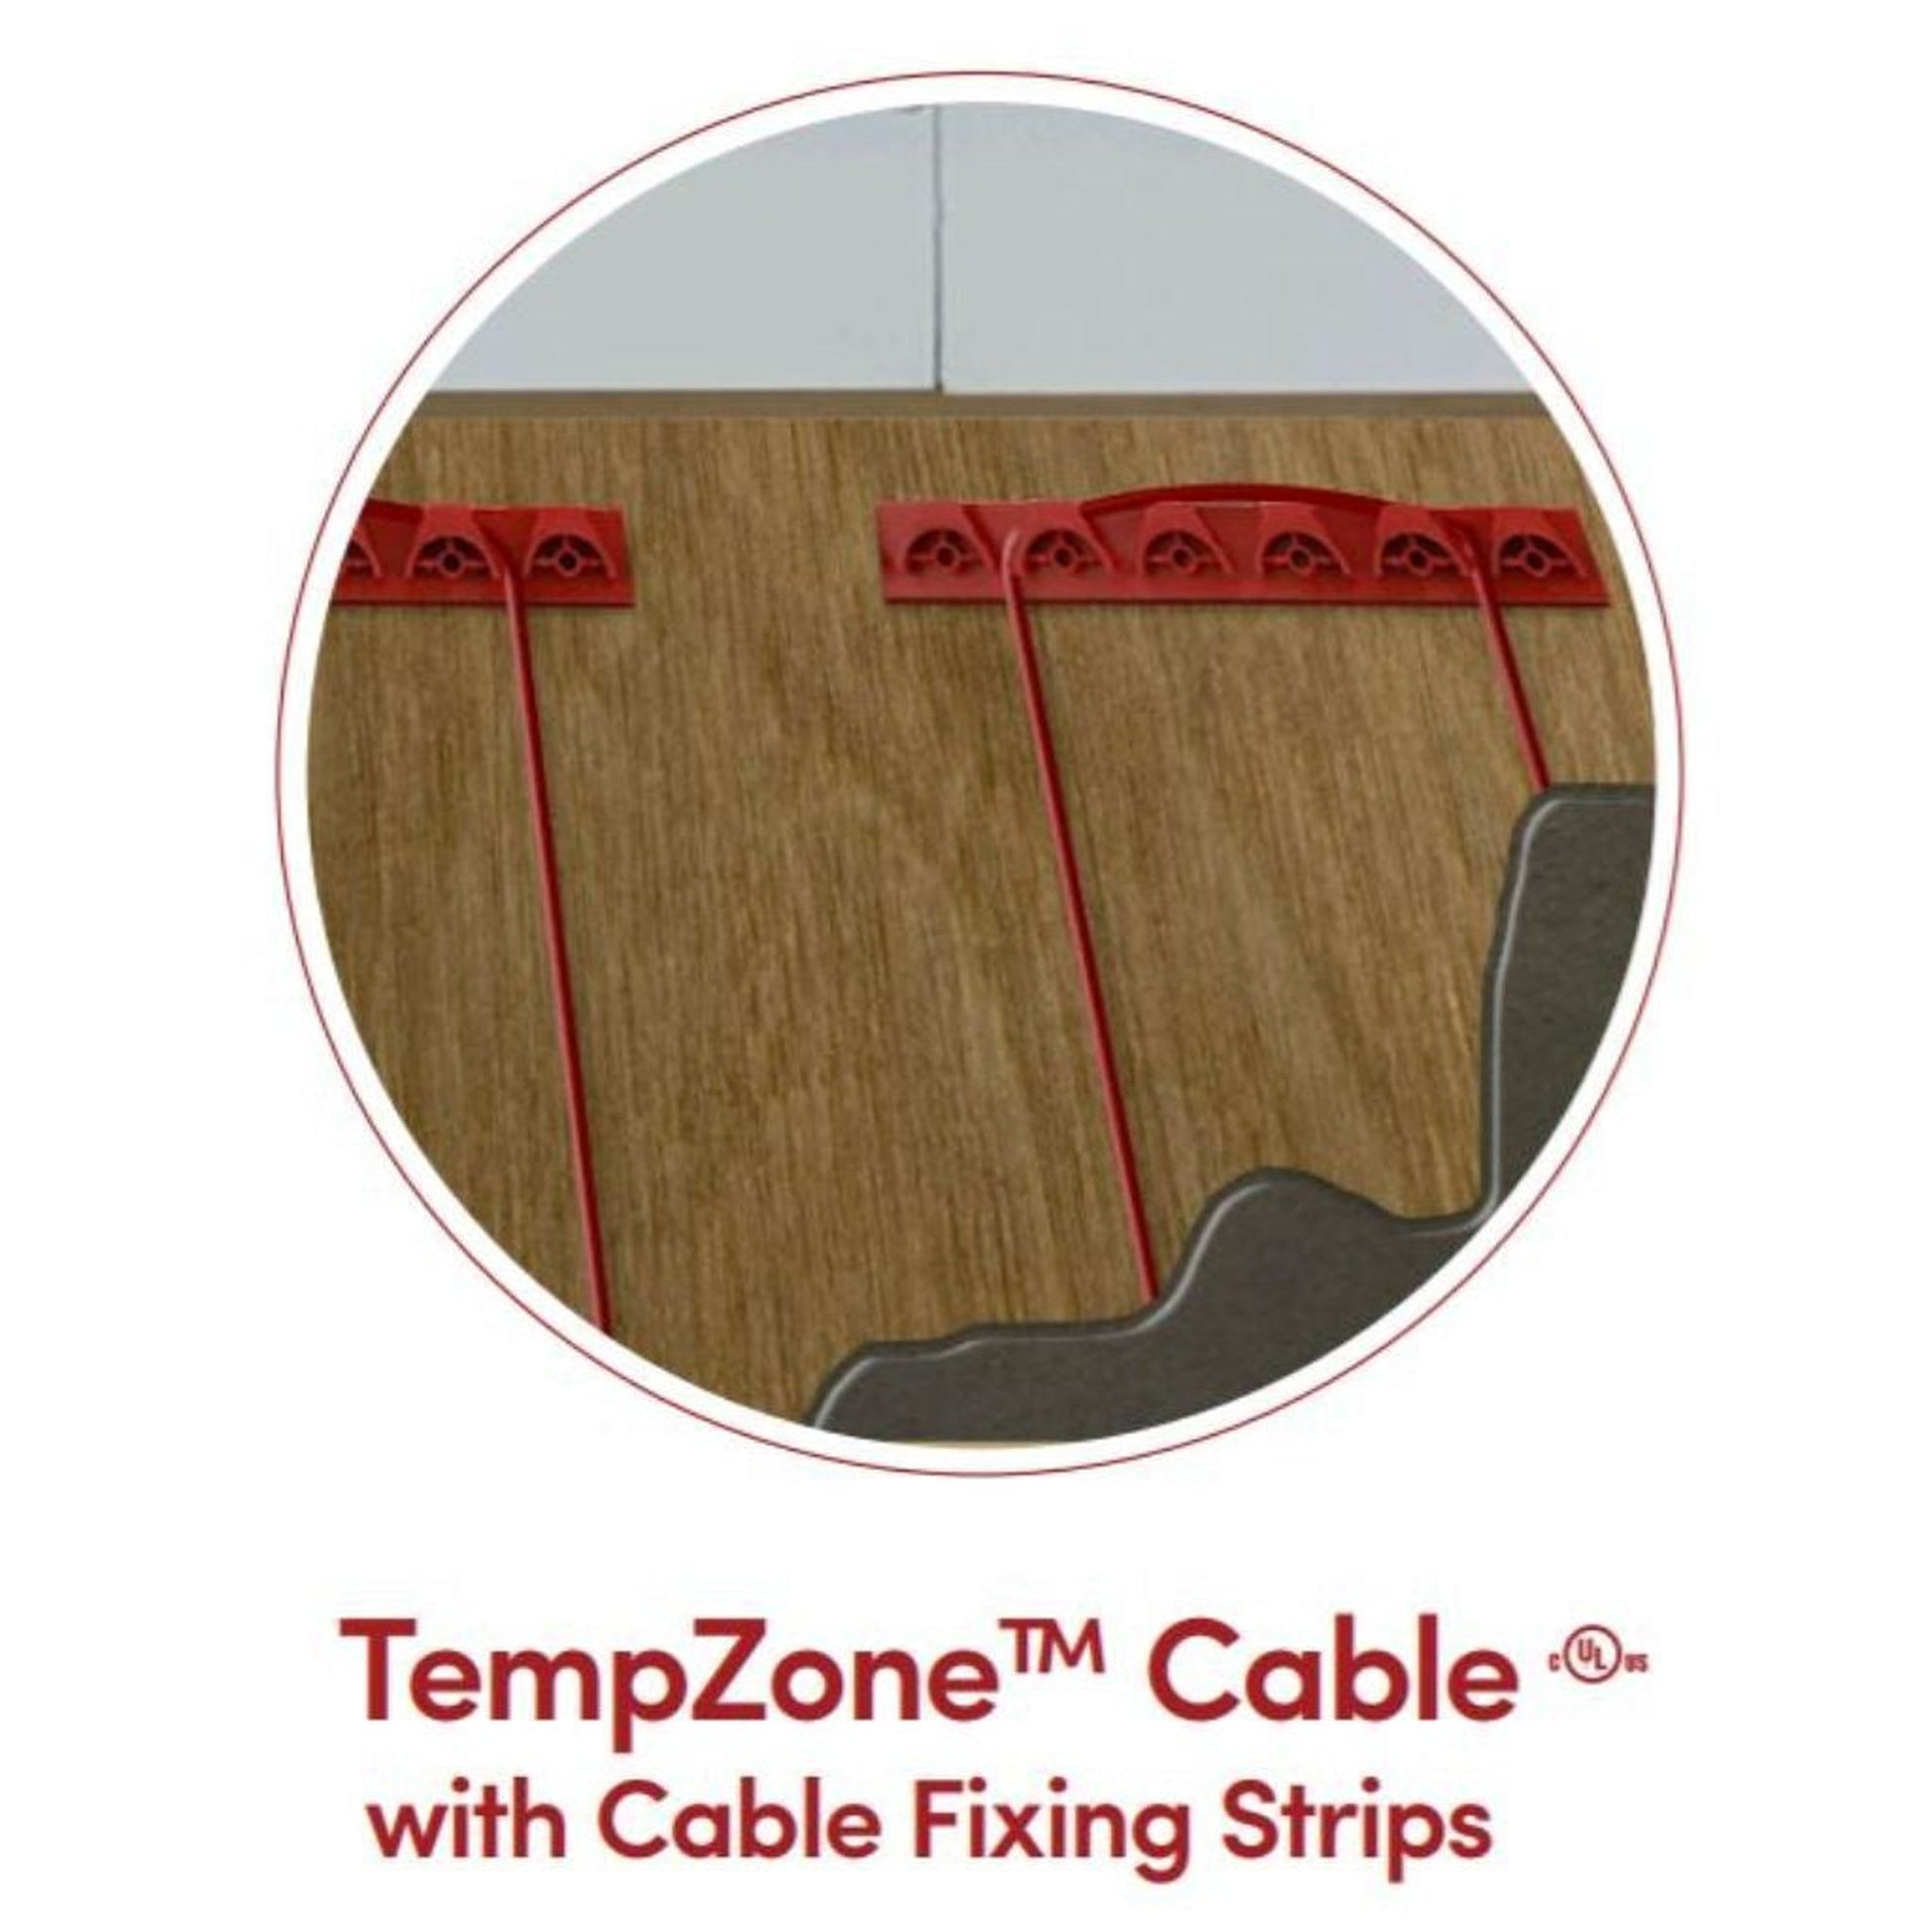 WarmlyYours TempZone Cable 595′ 240V Radiant Floor Heating Cable System Kit With nSpire Touch Programmable Touchscreen Thermostat